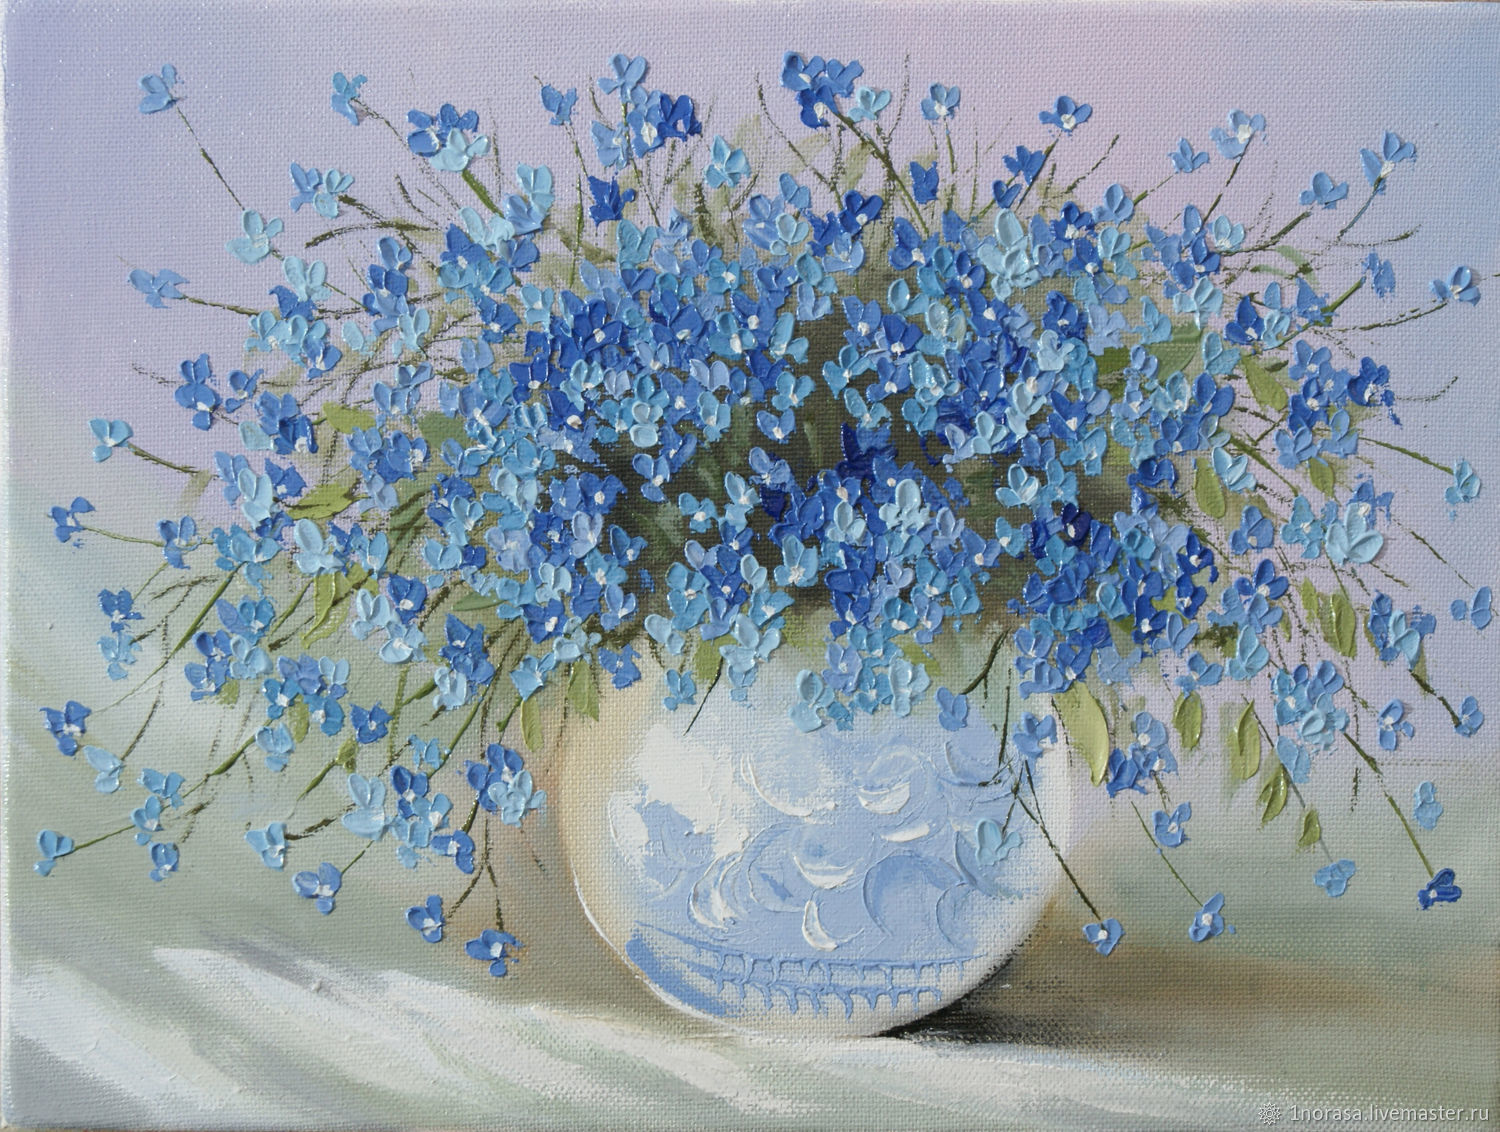 Forget-me-nots in a vase, Pictures, Chelyabinsk,  Фото №1